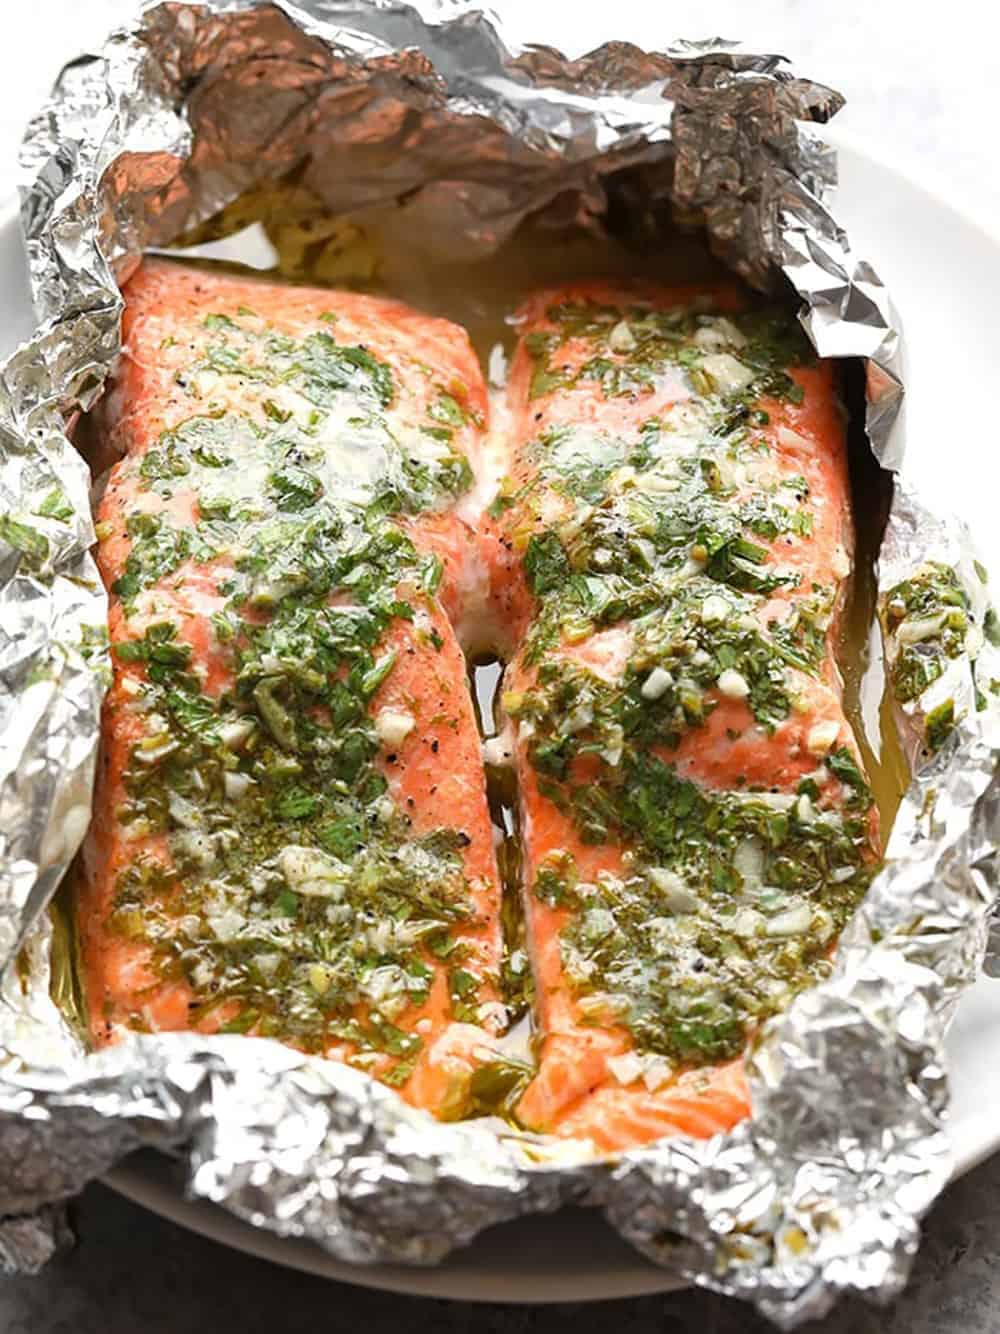 How to Make Grilled Salmon in Foil - Fit Foodie Finds